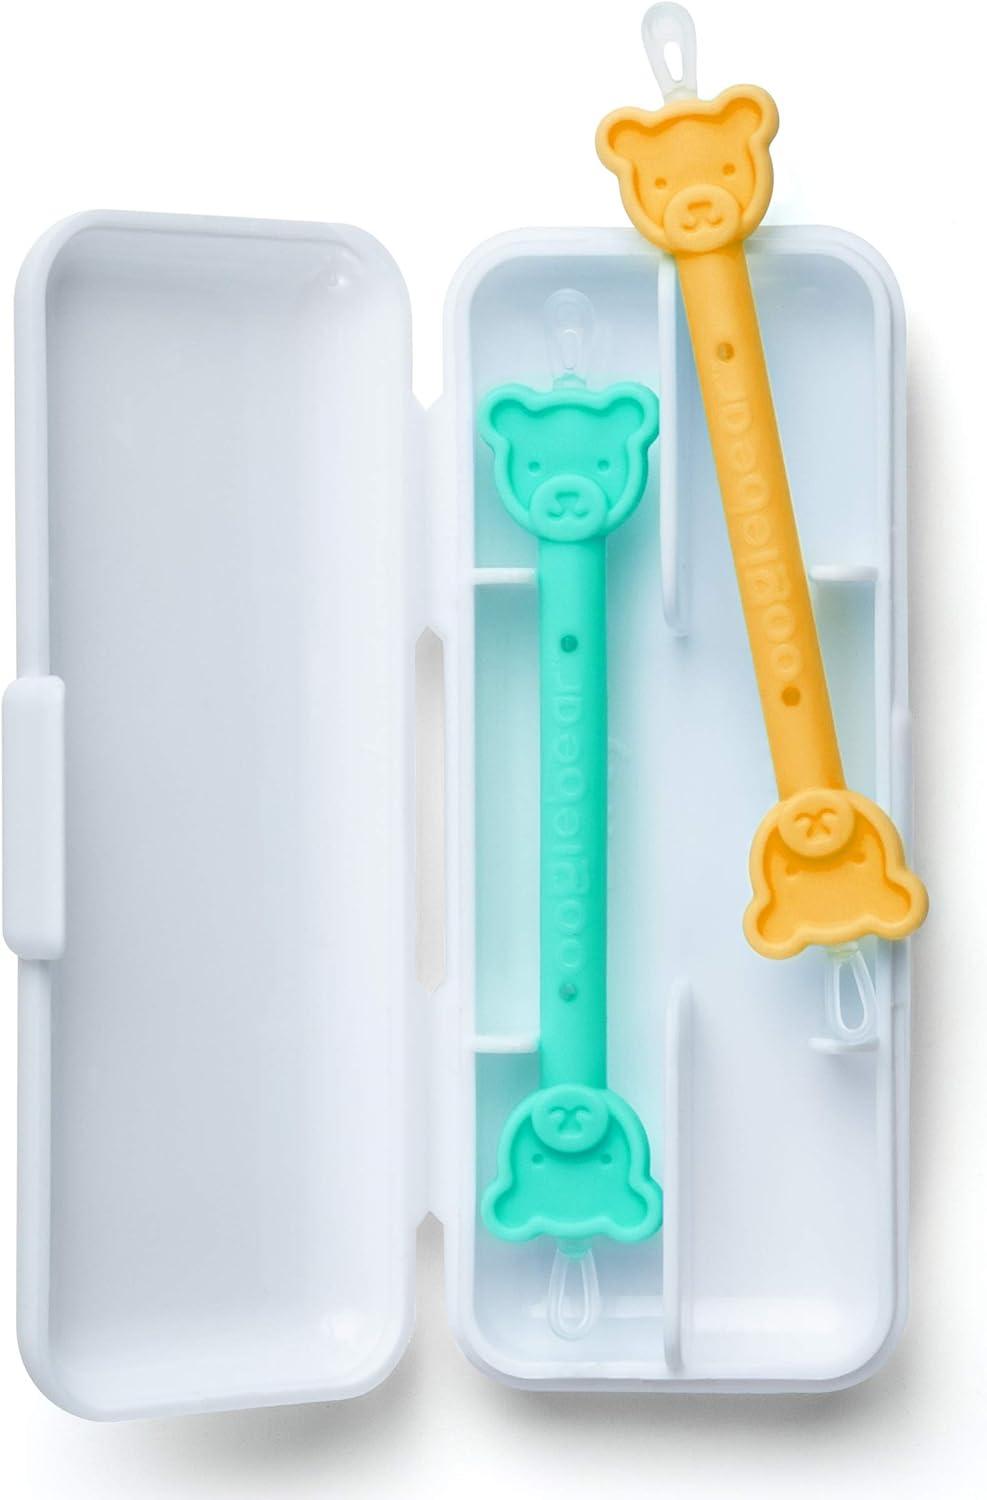 oogiebear The Bear Pair 2-in-1 Bulb Aspirator and Booger Picker